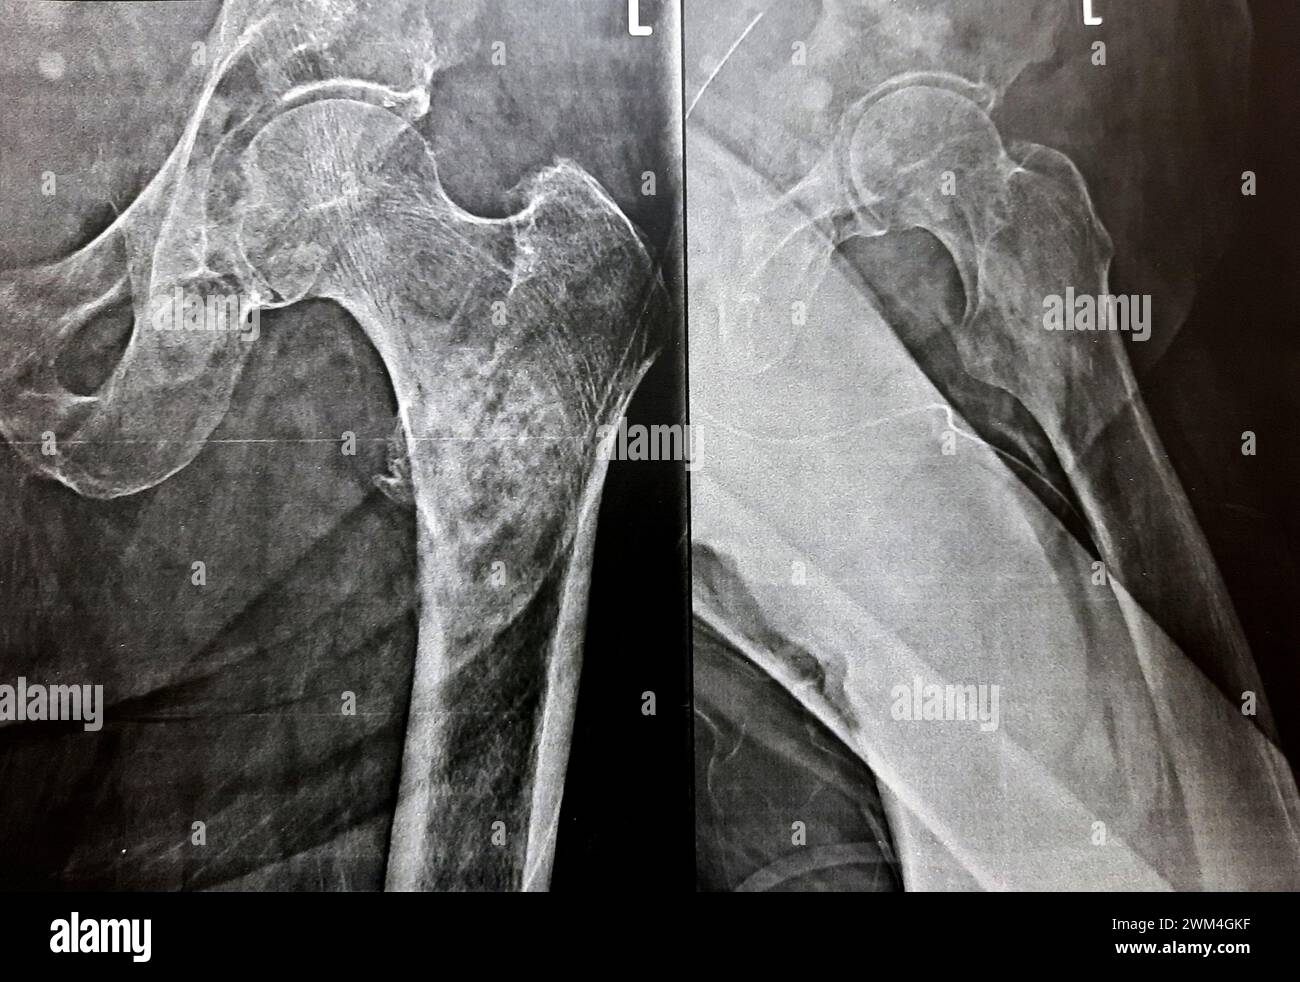 Plain x-ray with high probability of subtrochanteric, trochanteric fissure fracture, and malignancy metastasis in medial side of the femur shaft below Stock Photo